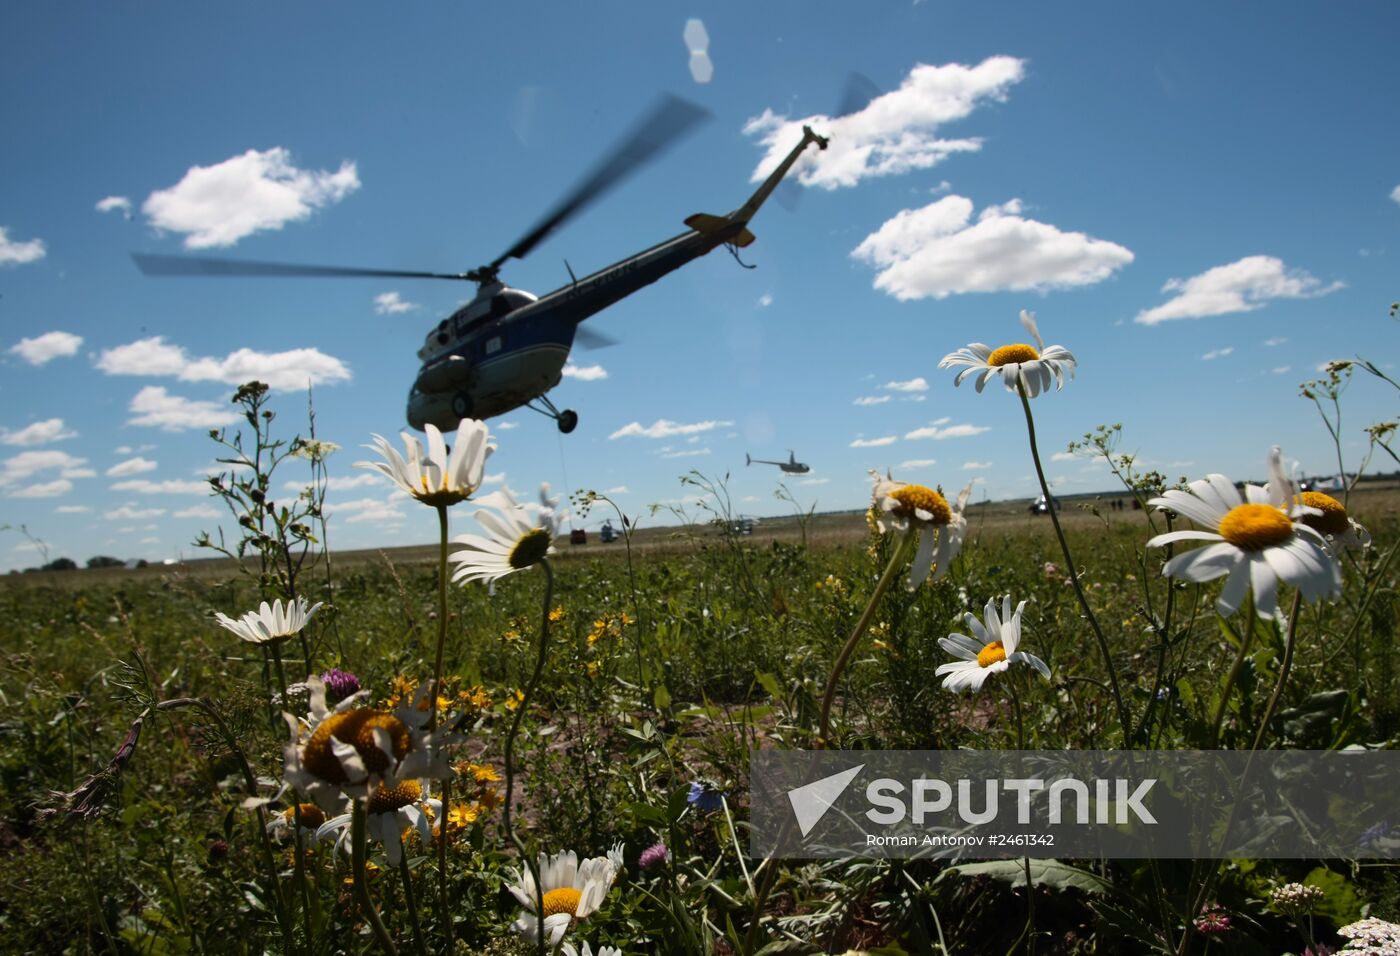 49th open Russian helicopter sport championship